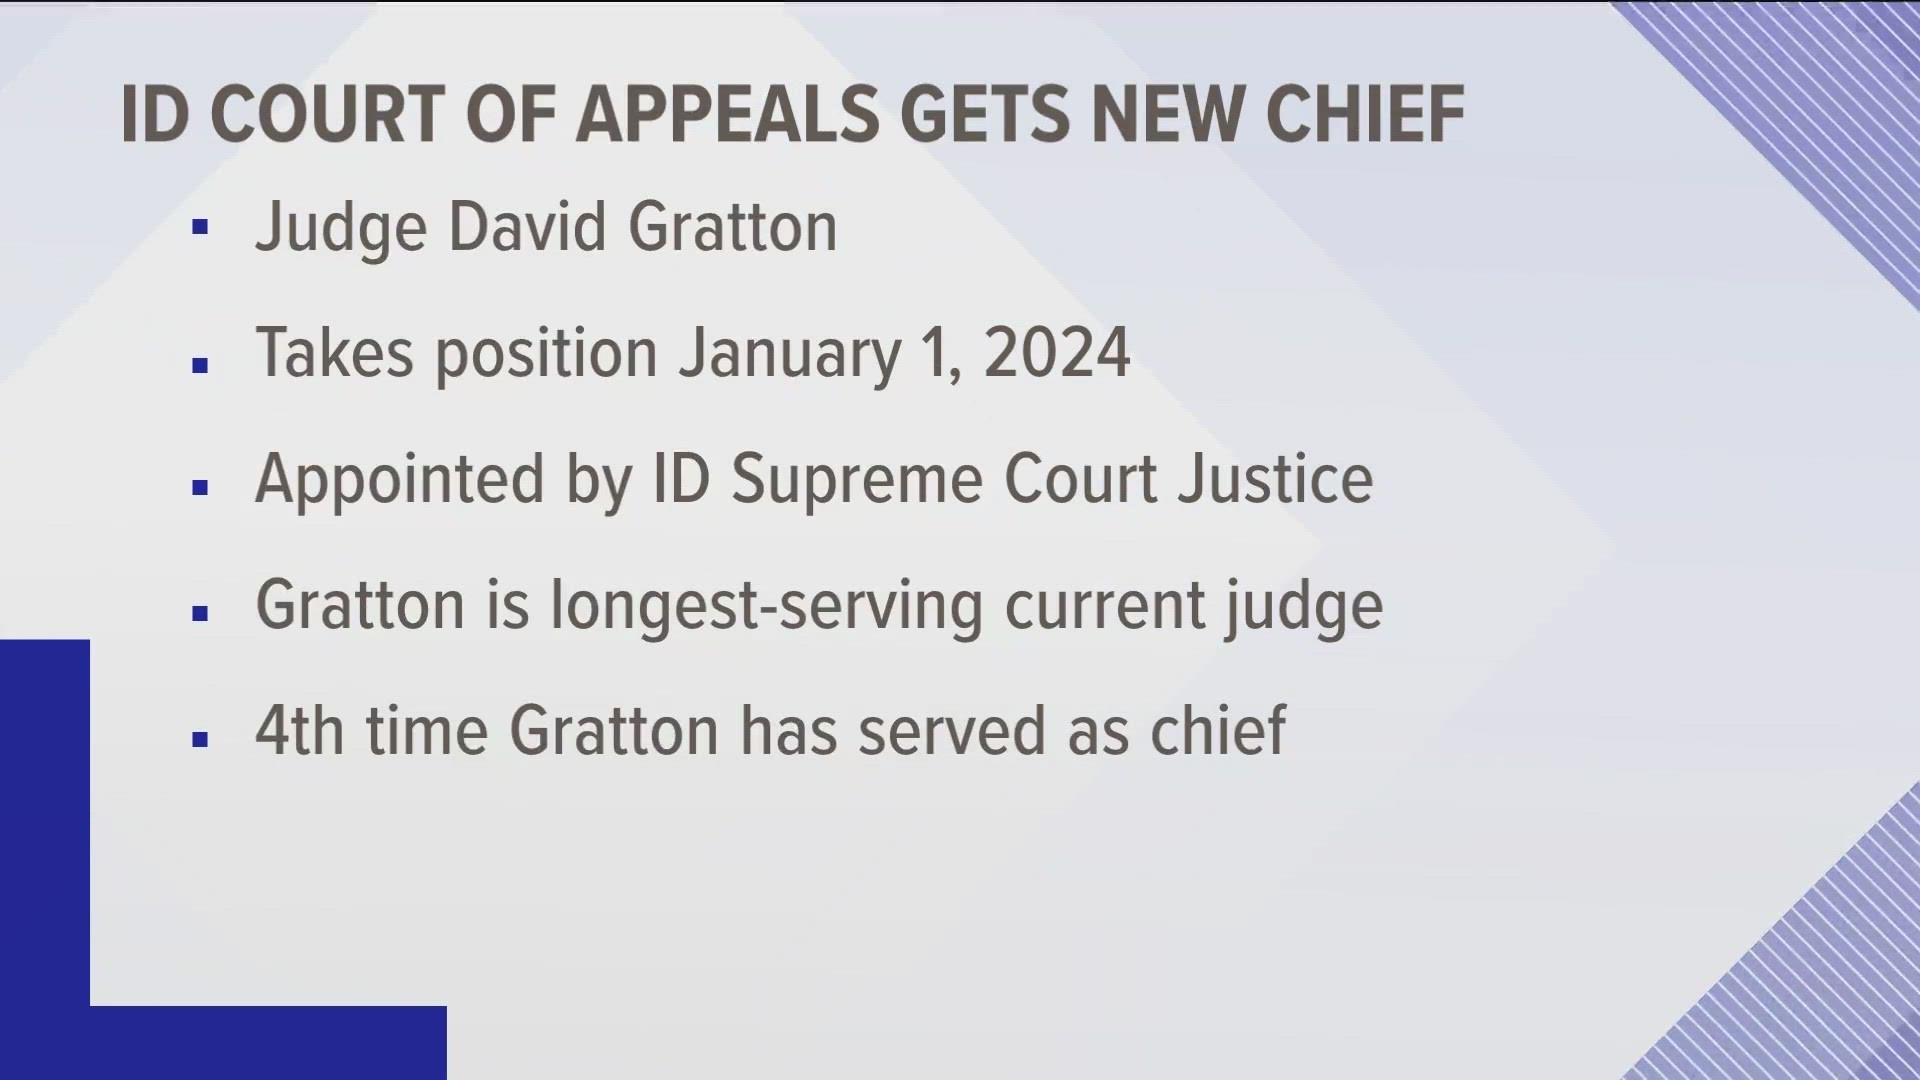 Idaho Court of Appeals Judge Gratton will become that court's next chief judge, effective Jan. 1, 2024.